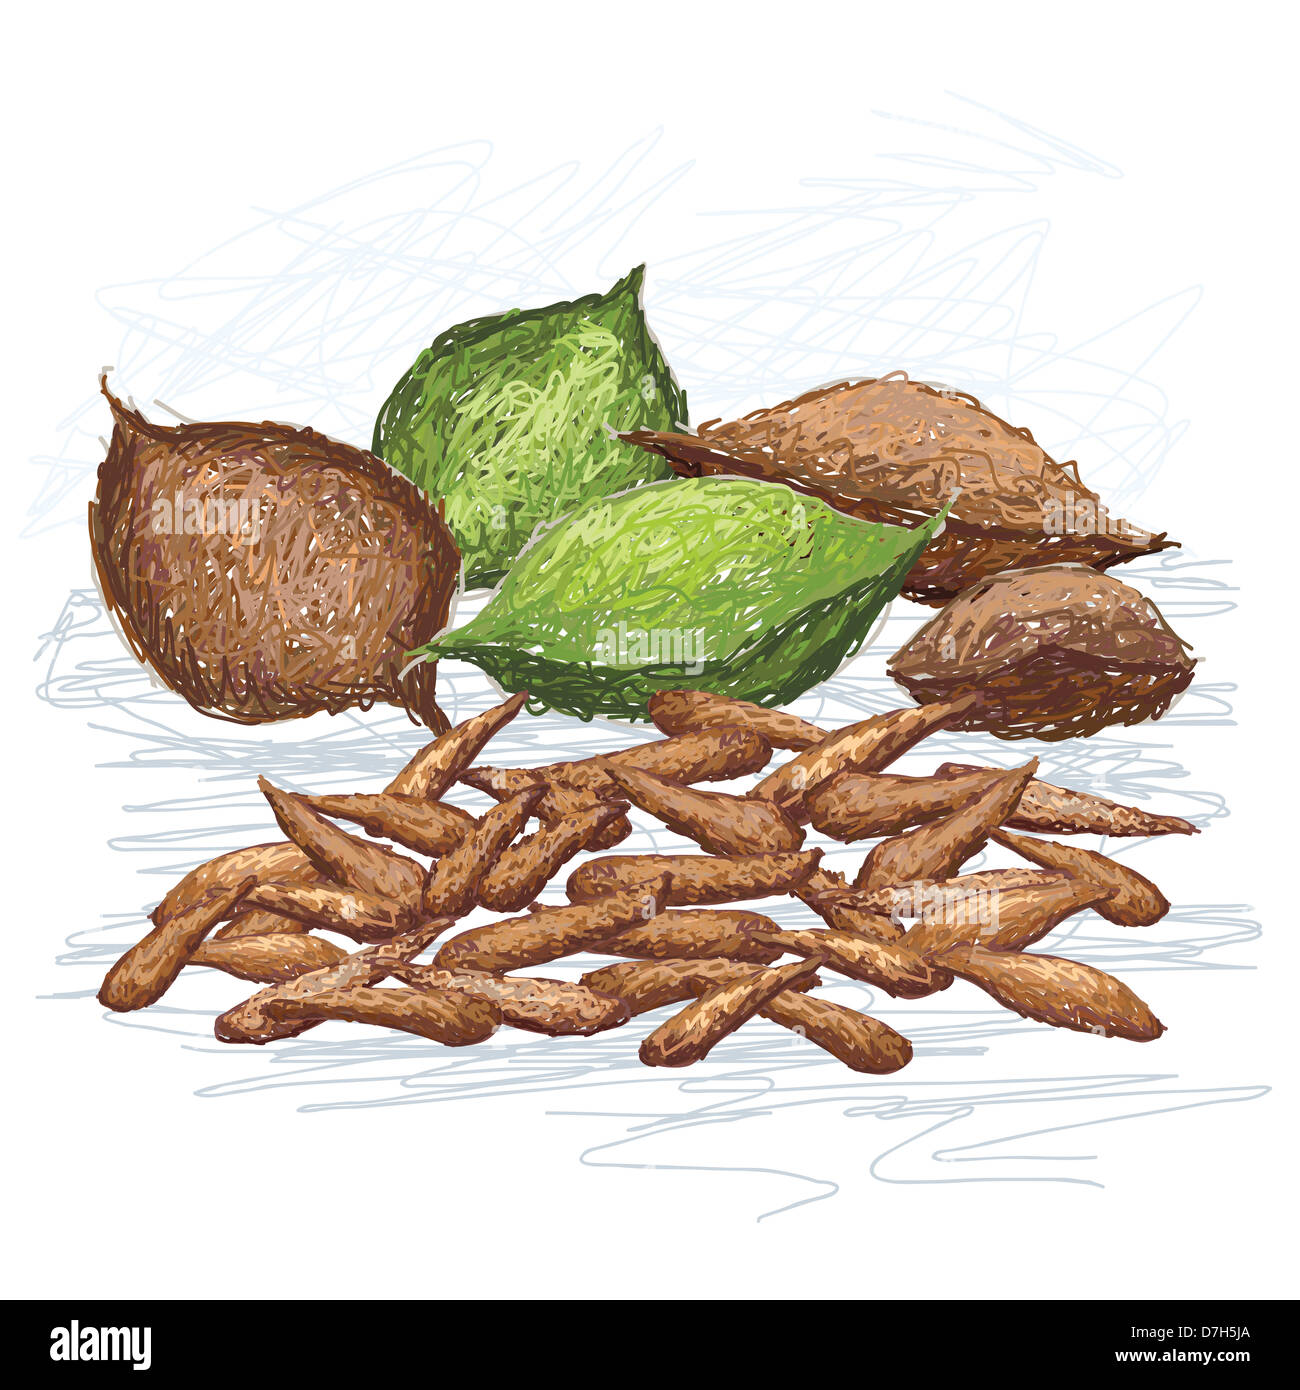 illustration of talisay fruit and nuts, scientific name - Terminalia catappa, isolated in white background. Stock Photo